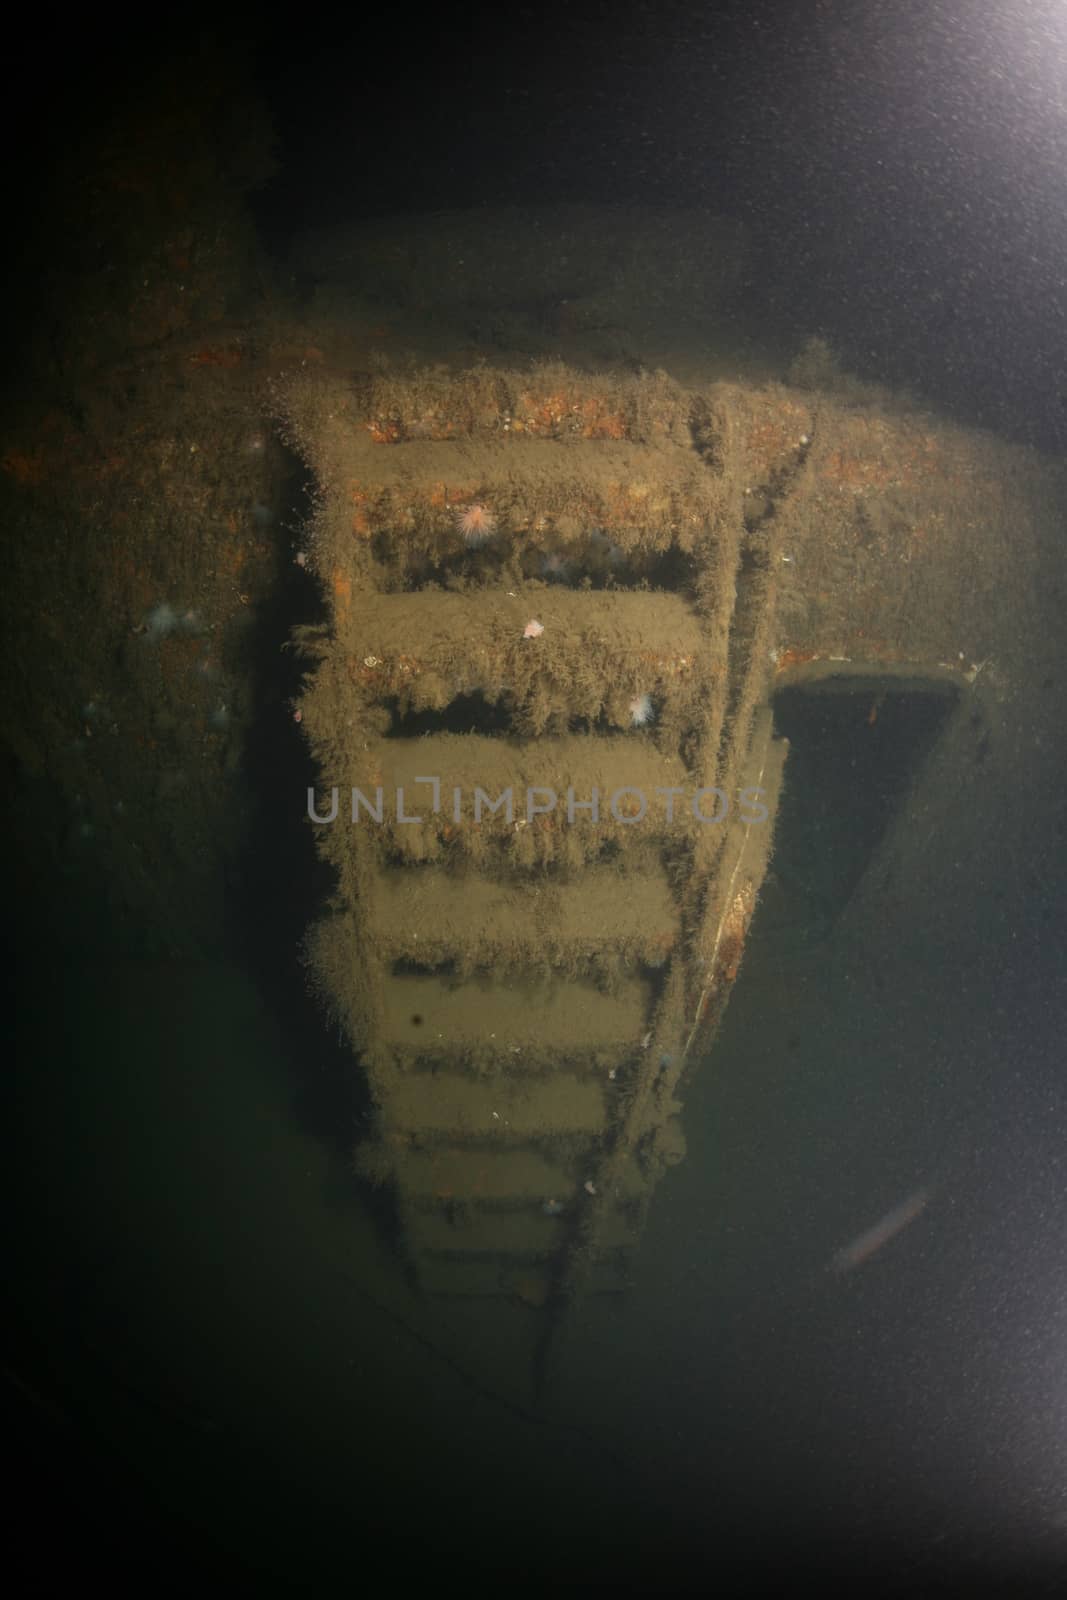 Baltic Sea underwater diving Ship Wreck photo